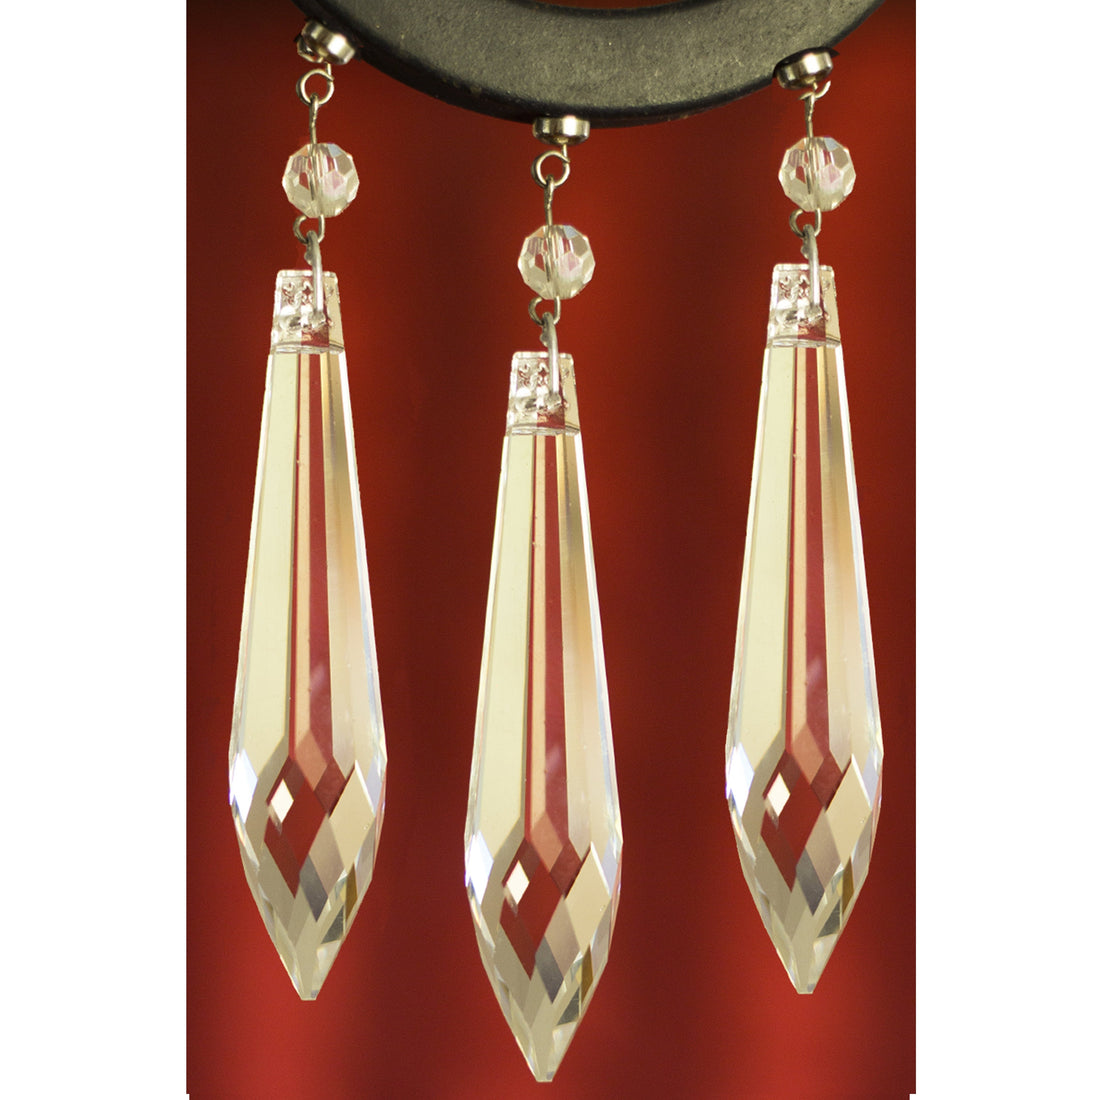 4.5 " CLEAR CRYSTAL SPEAR DROP Magnetic Chandelier Crystal TrimKit® (Box of 3) - MagTrim Designs LLC